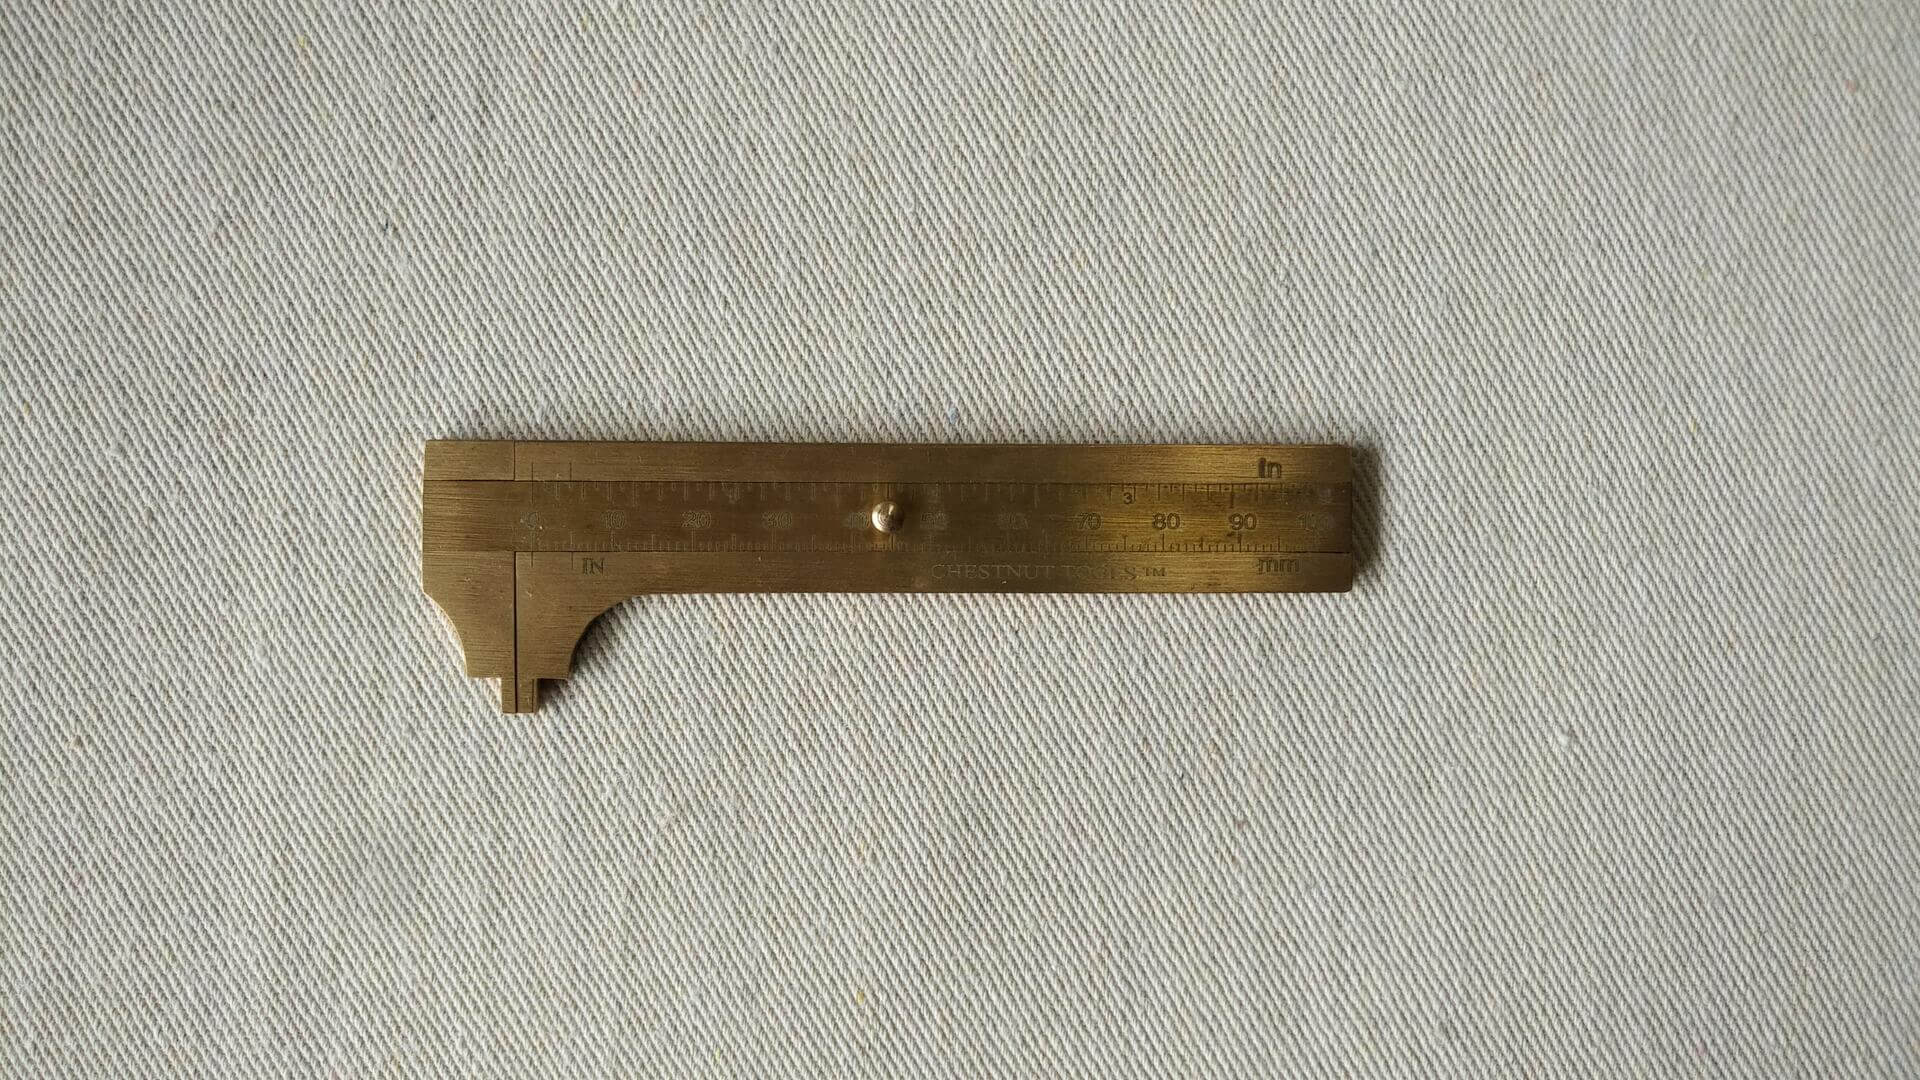 Solid brass inside and outside sliding mini caliper with both metric and imperial scales at 100mm or 4" capacity. Sized to fit in a shirt or apron pocket